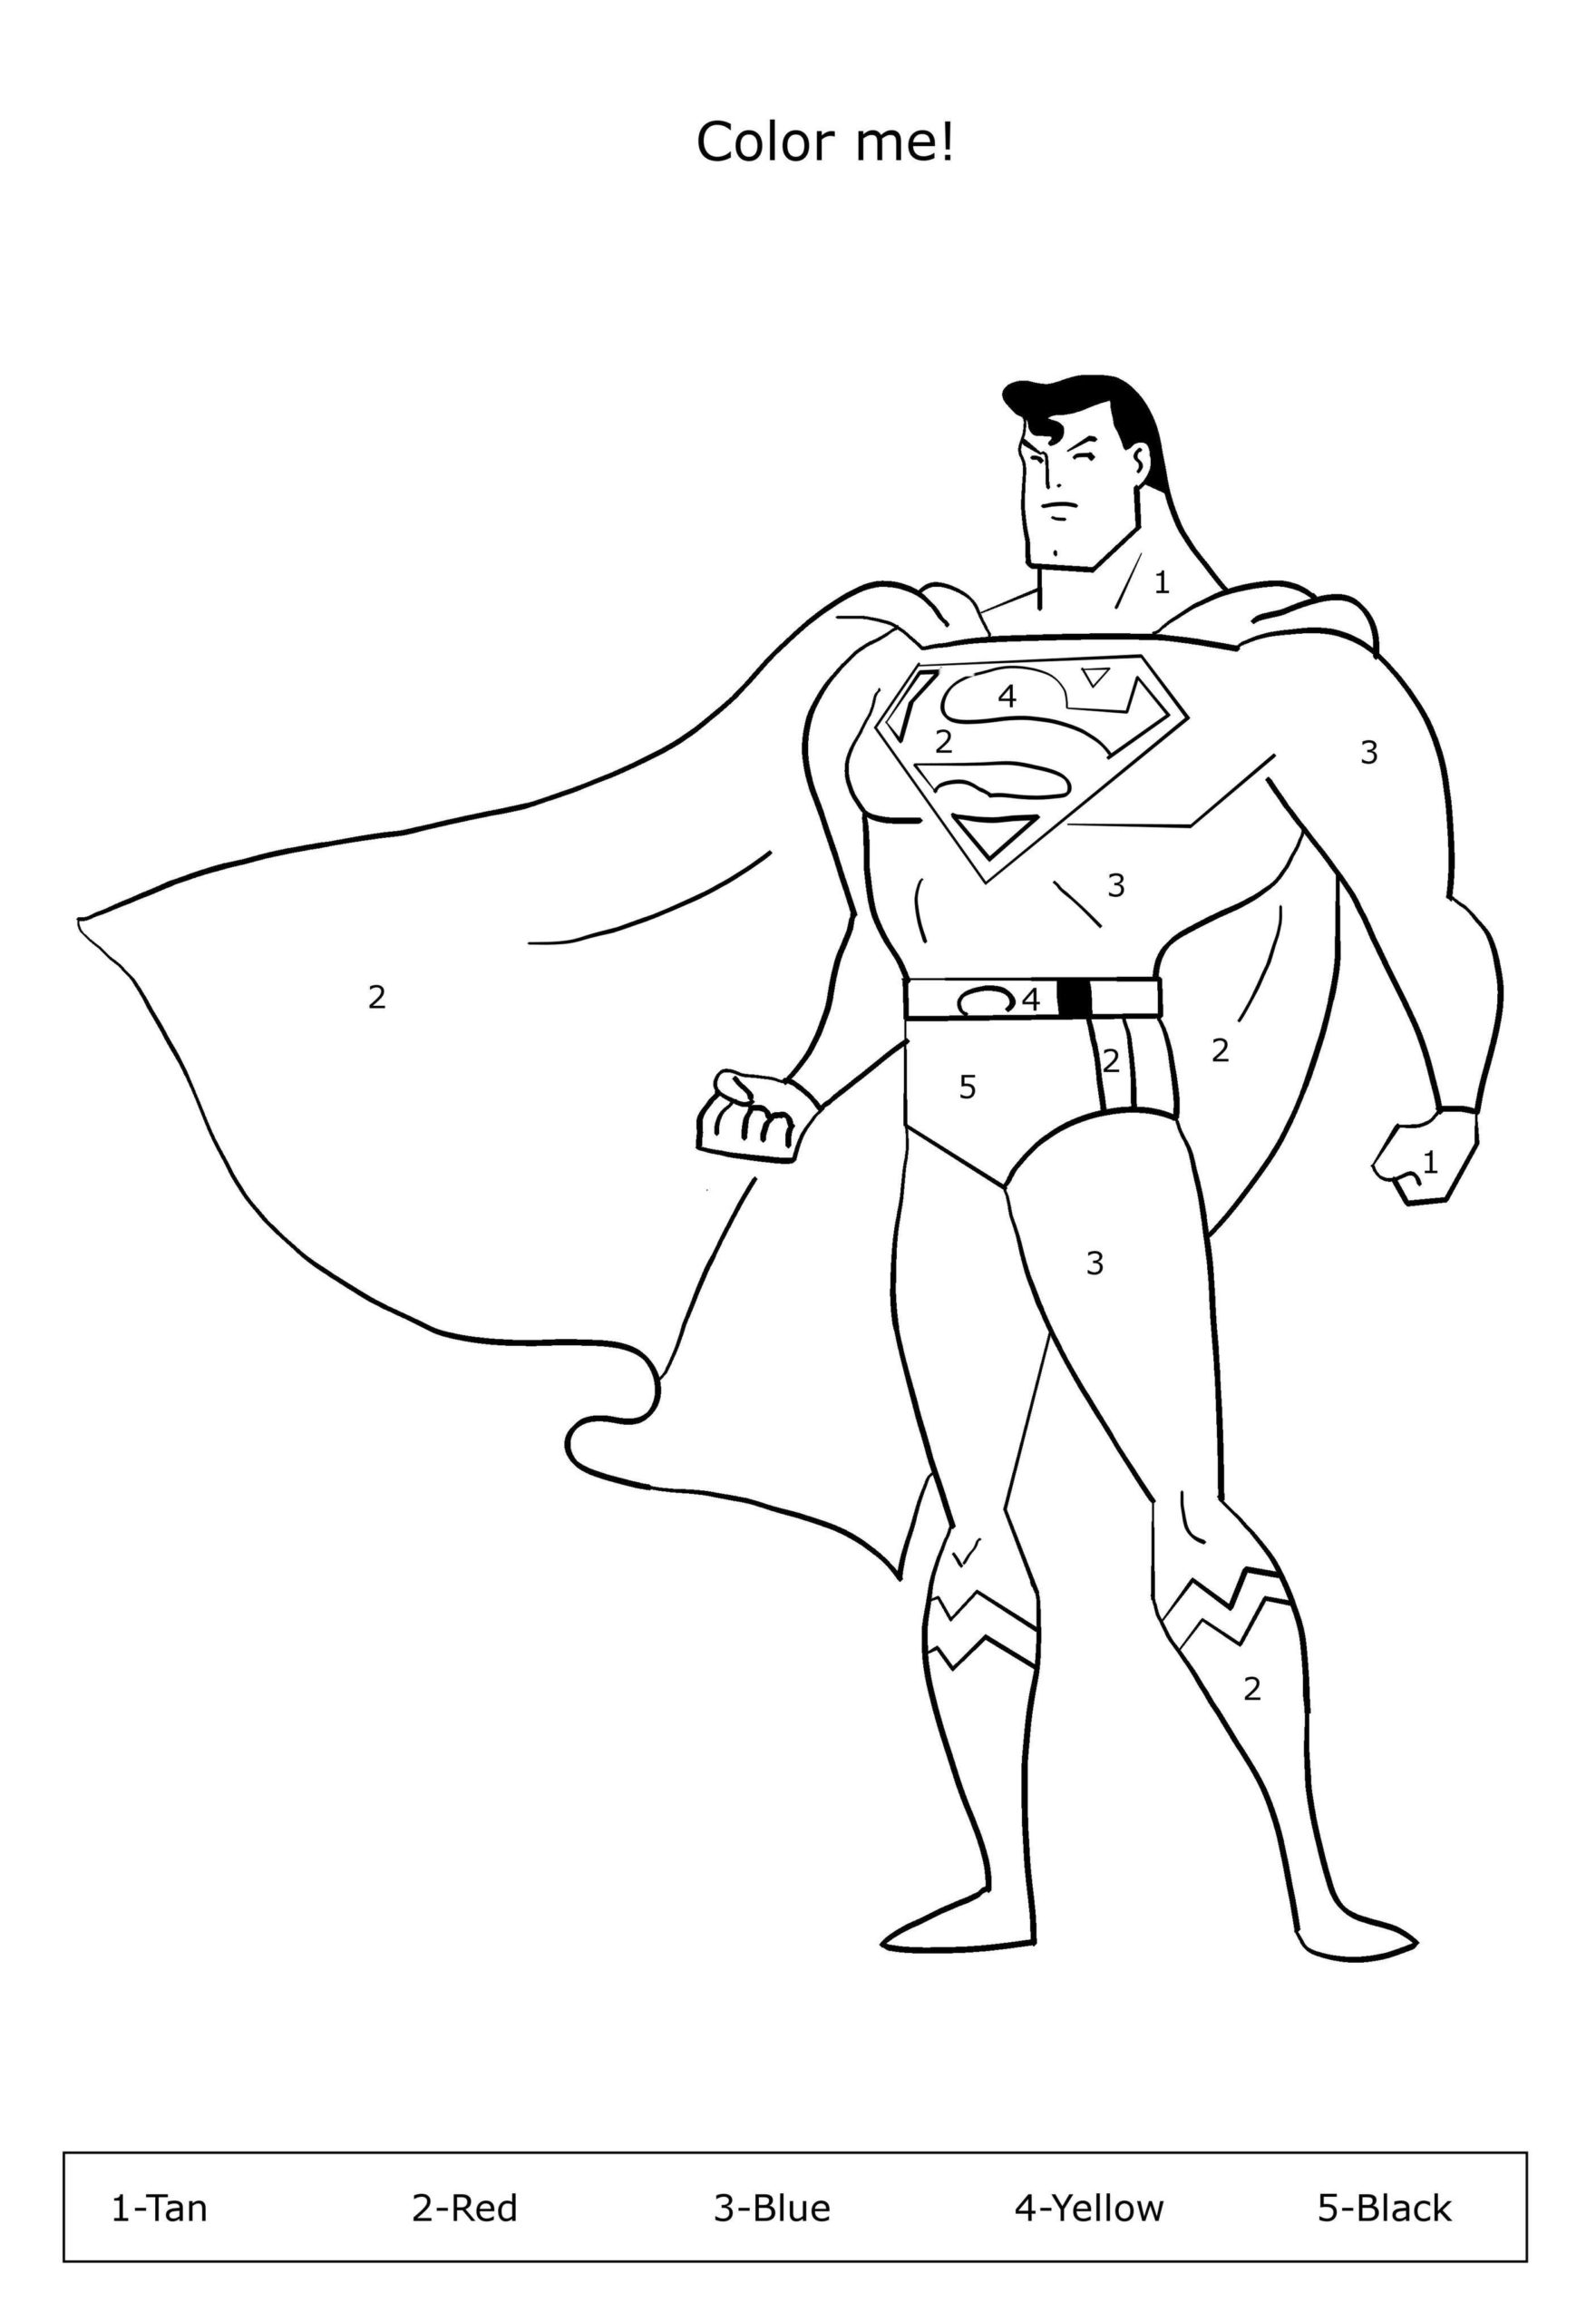 Superman coloring sheets pack of â coloring books for kidz